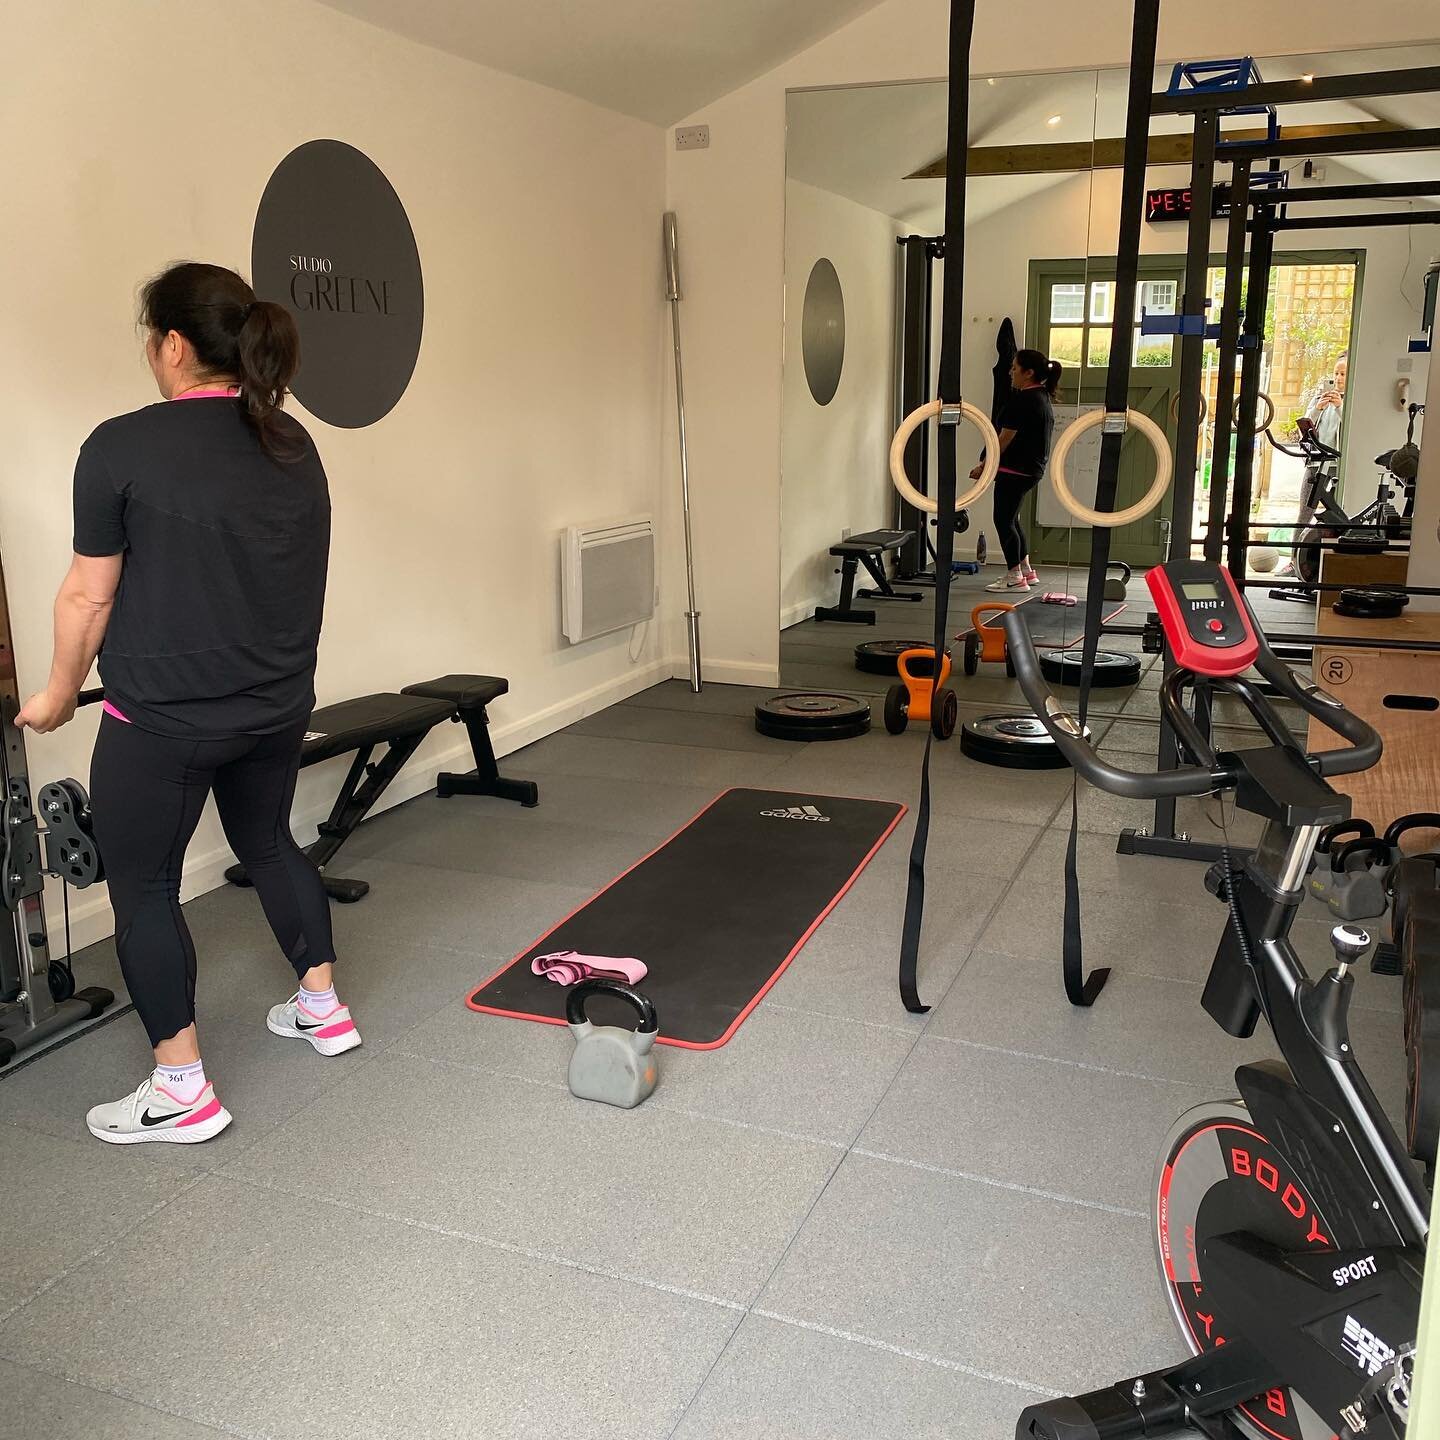 A few new faces here at Studio Greene!⁣
⁣
I&rsquo;m now able to offer semi private PT sessions. ⁣
⁣
Train with your mates!! ⁣
⁣
I have a few more slots available DM me for info. ⁣
⁣
#personaltraining #fitness #personaltrainer #workout #training #gym 